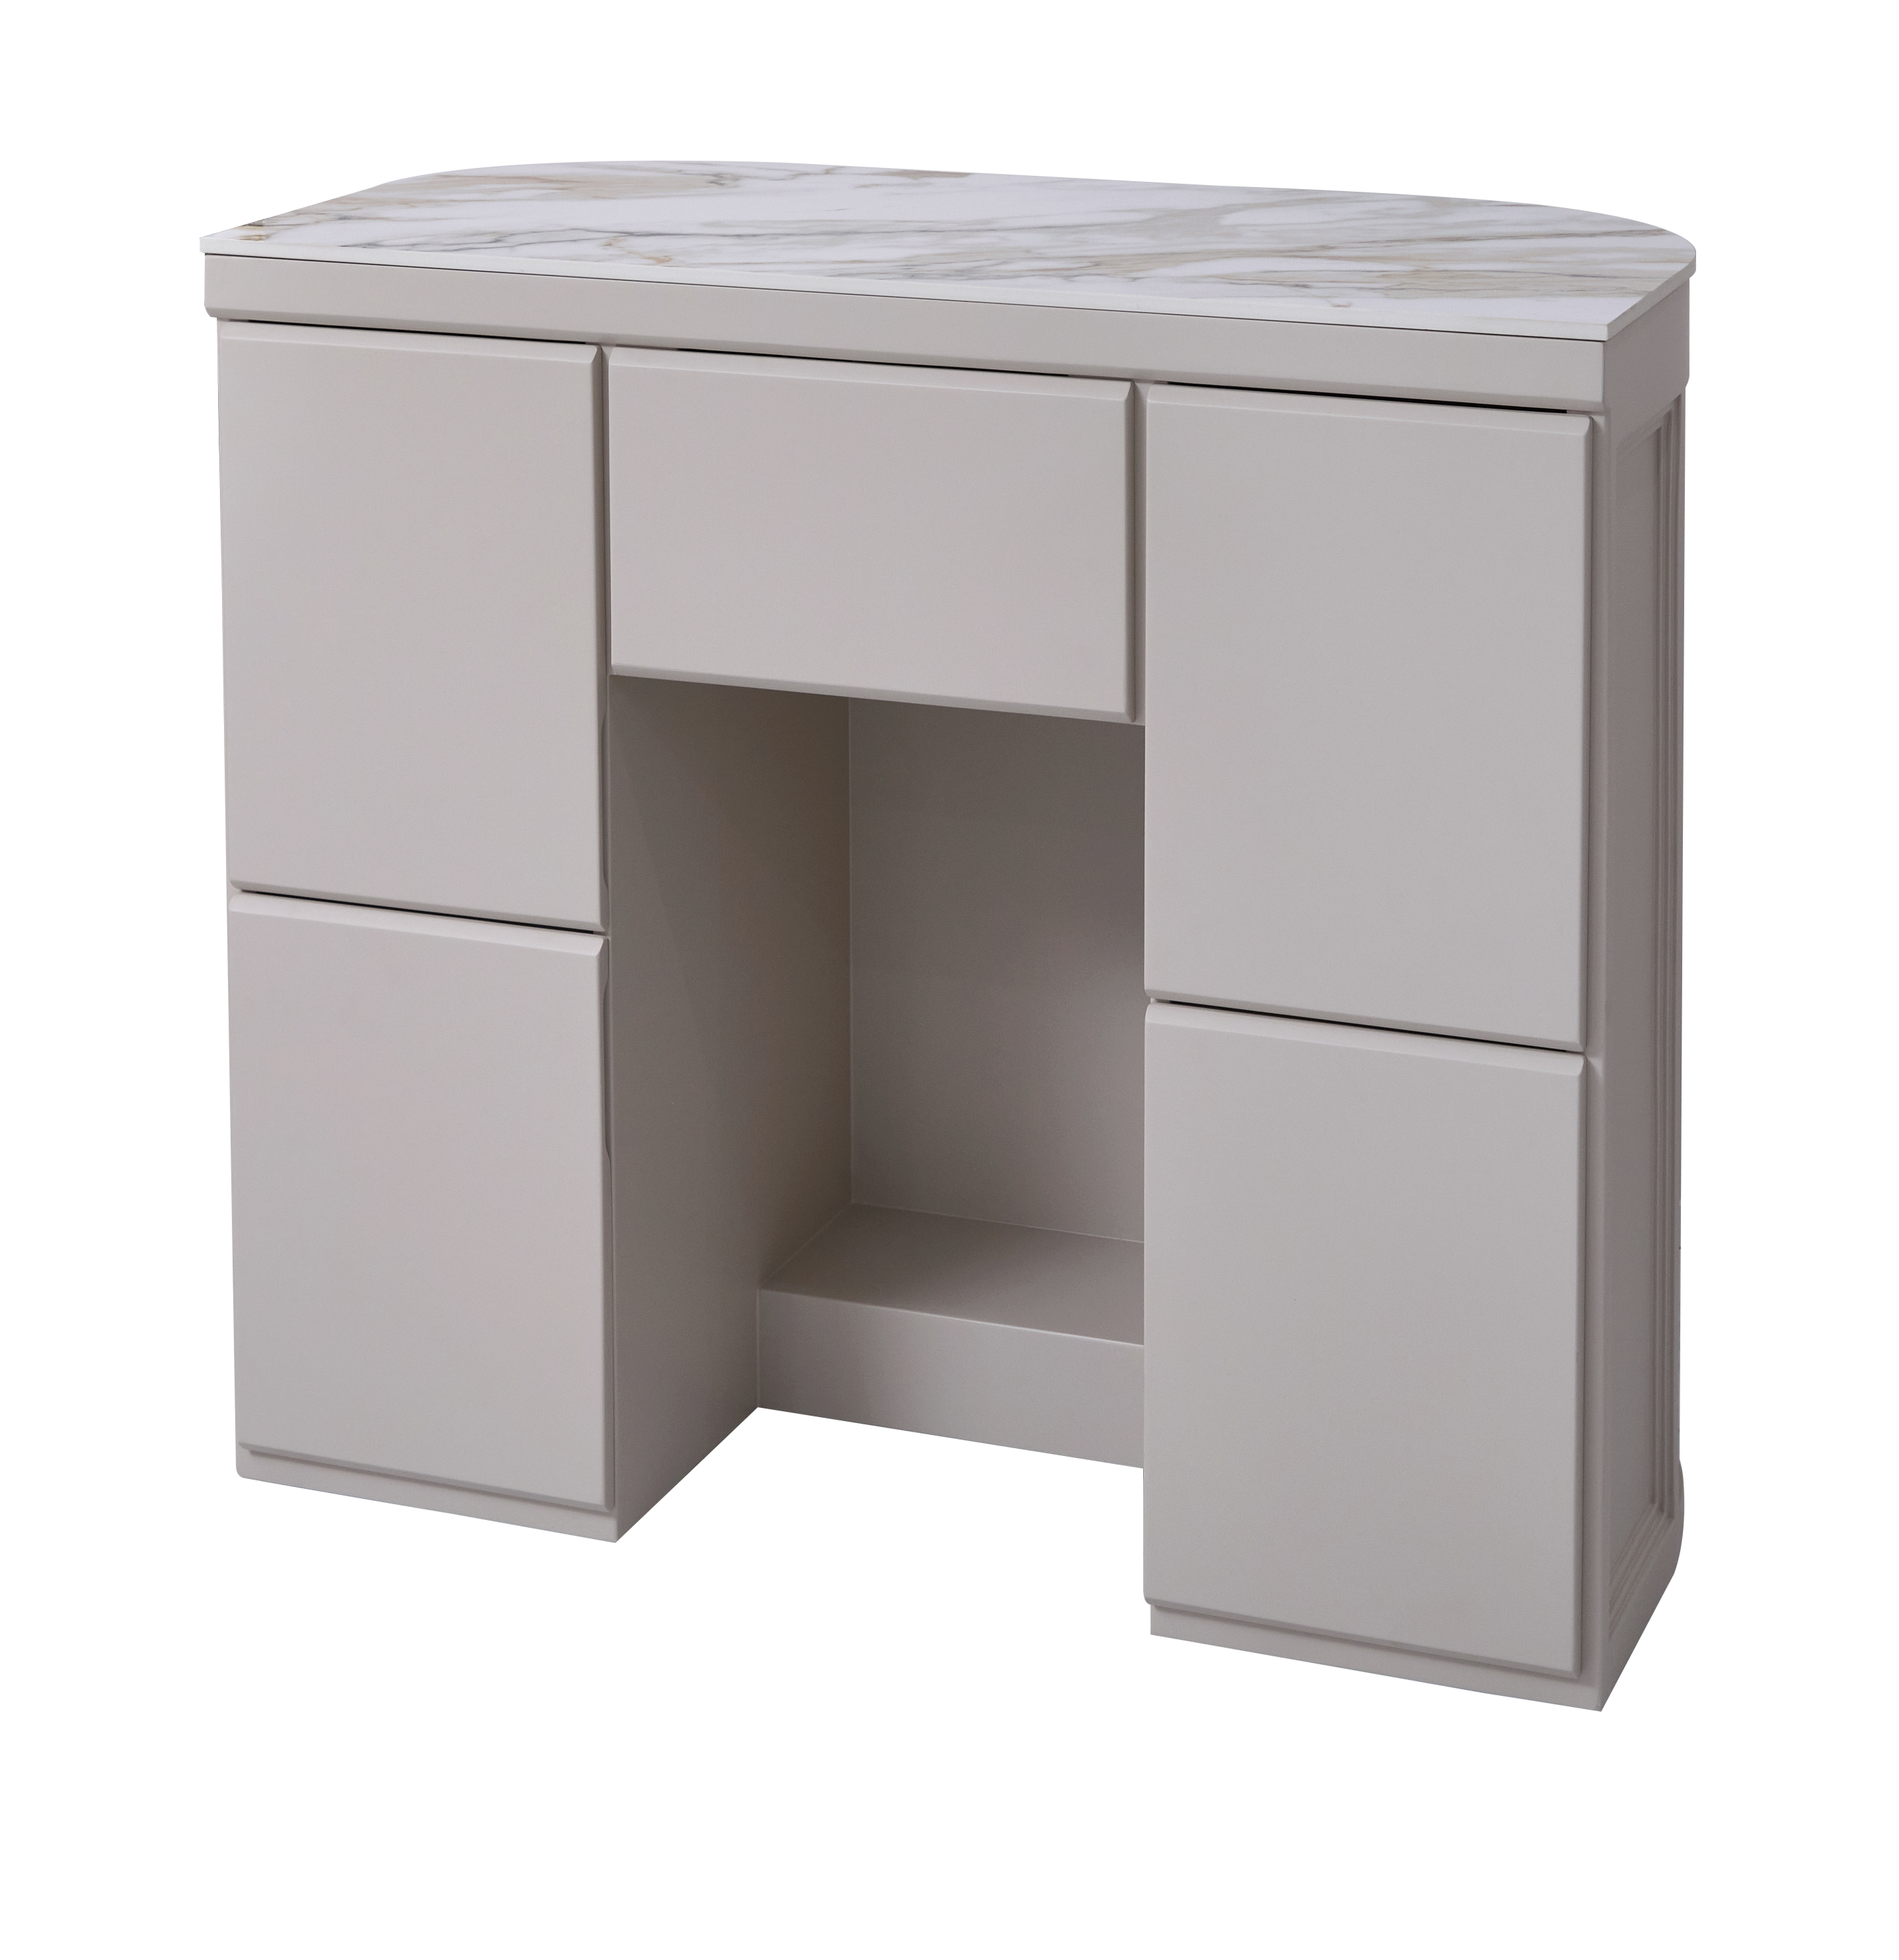 The Monroe Desk - Ivory & Natural Stone Top by SEC